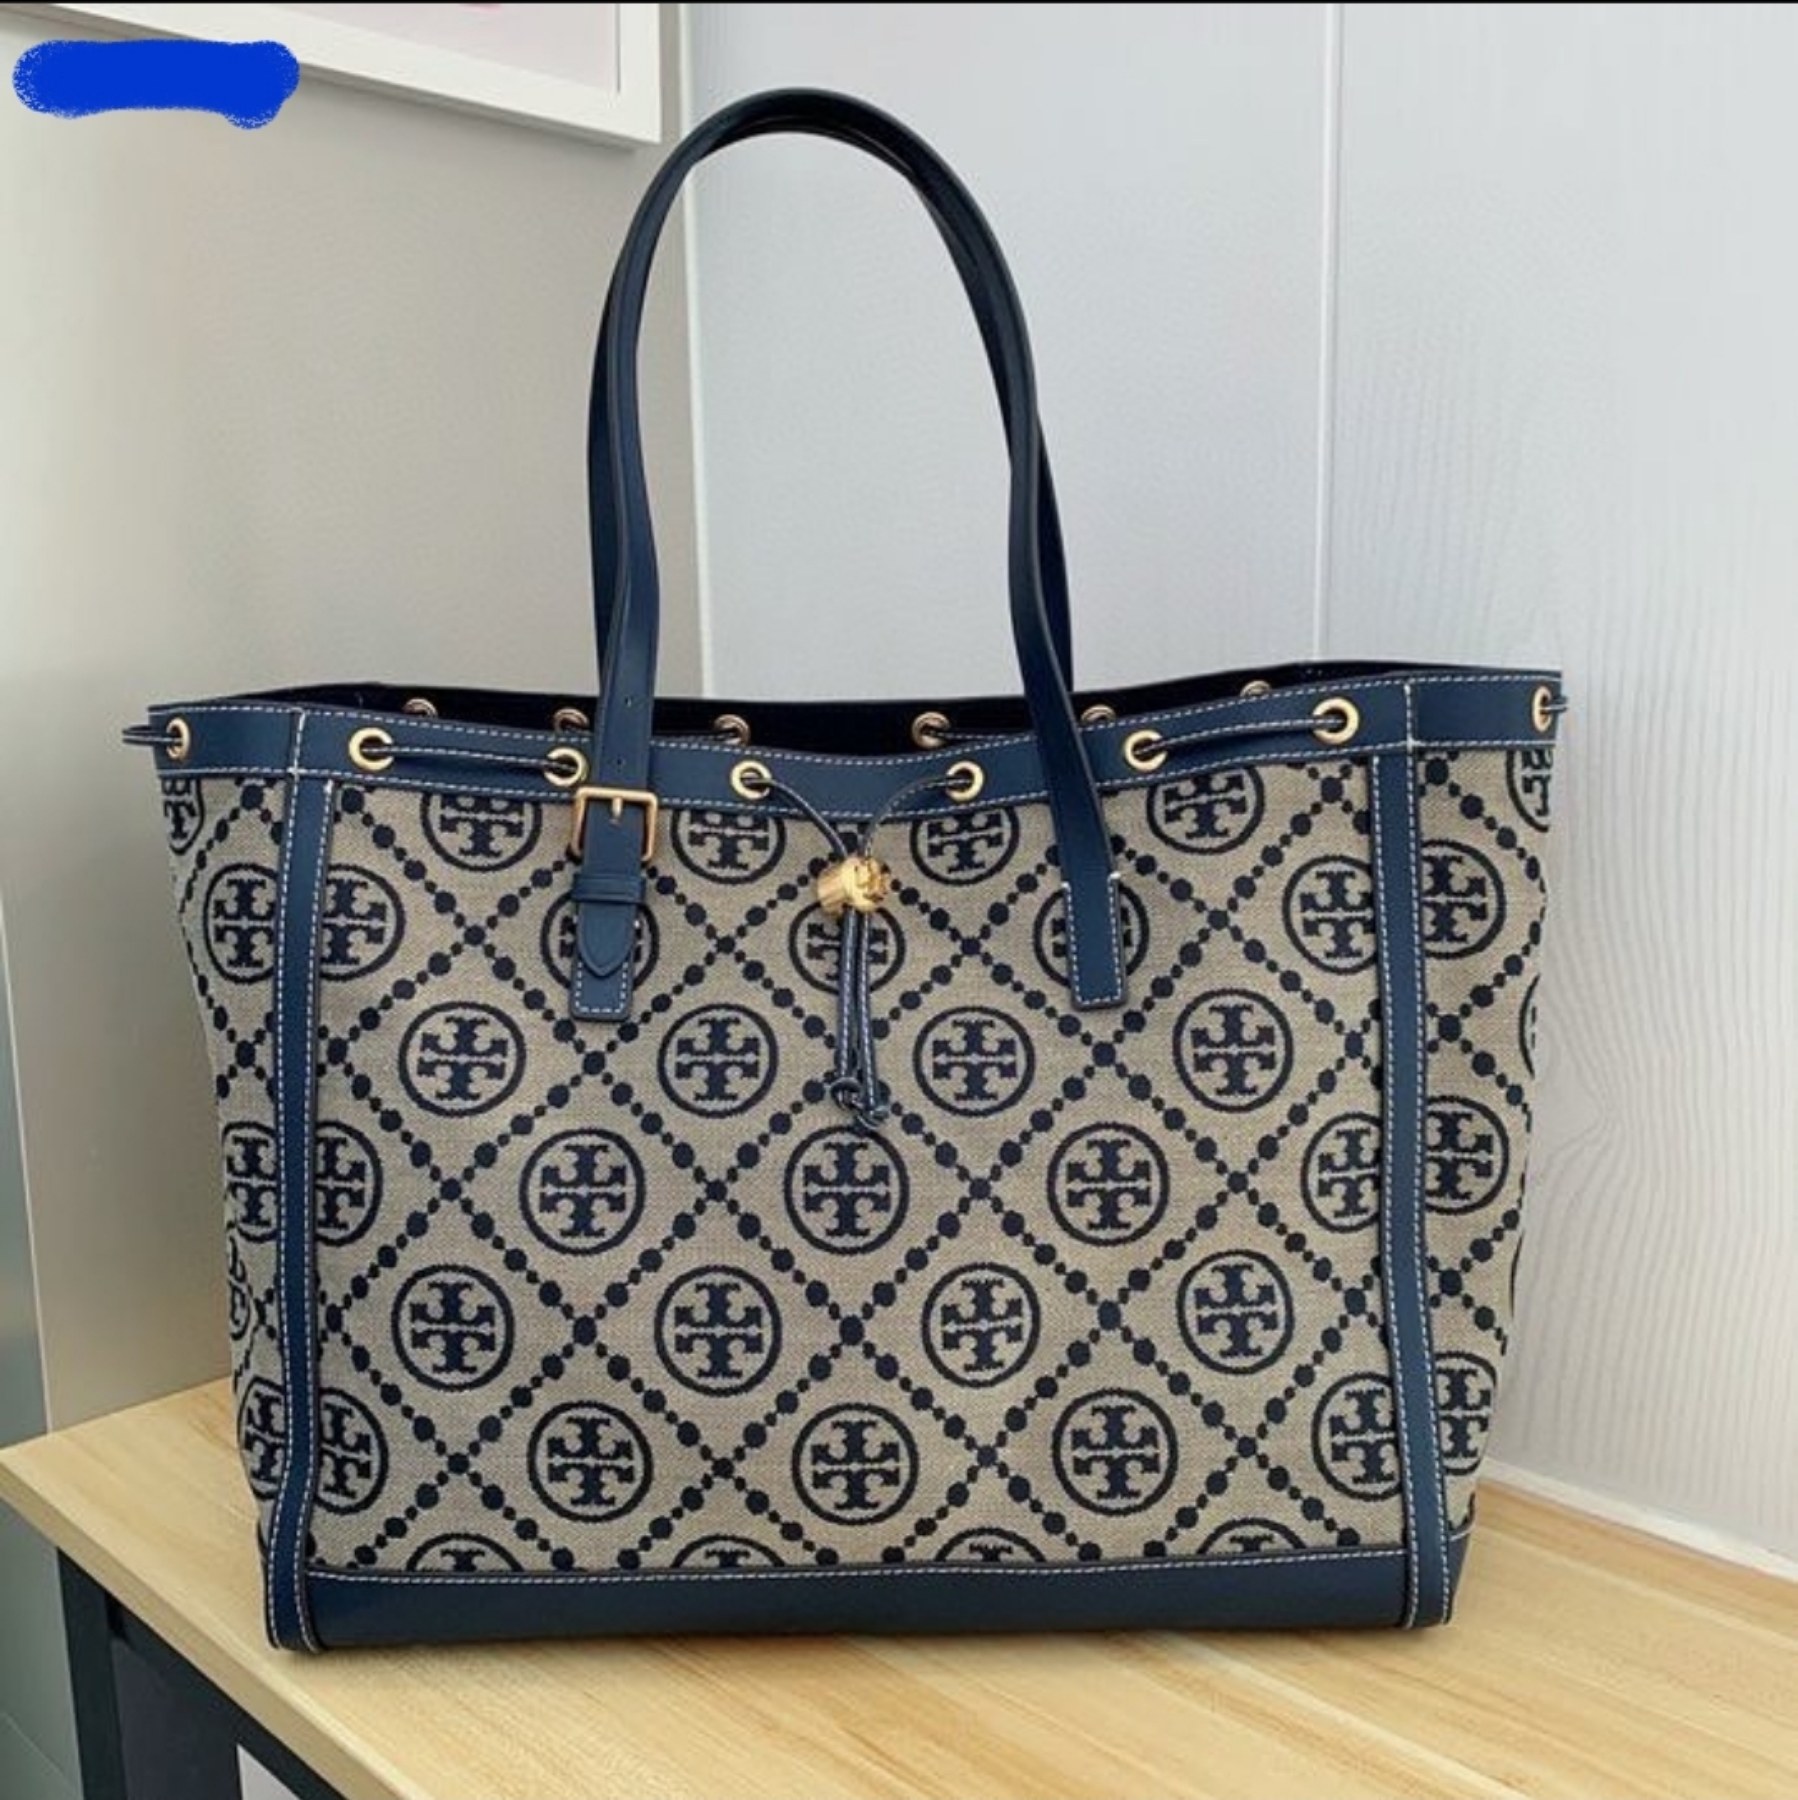 .Y . 80644 T Monogram in Navy Blue Woven Jacquard Tote Bag  with Fine Leather Trim and Drawstring Closure - Women's Bag | Lazada PH